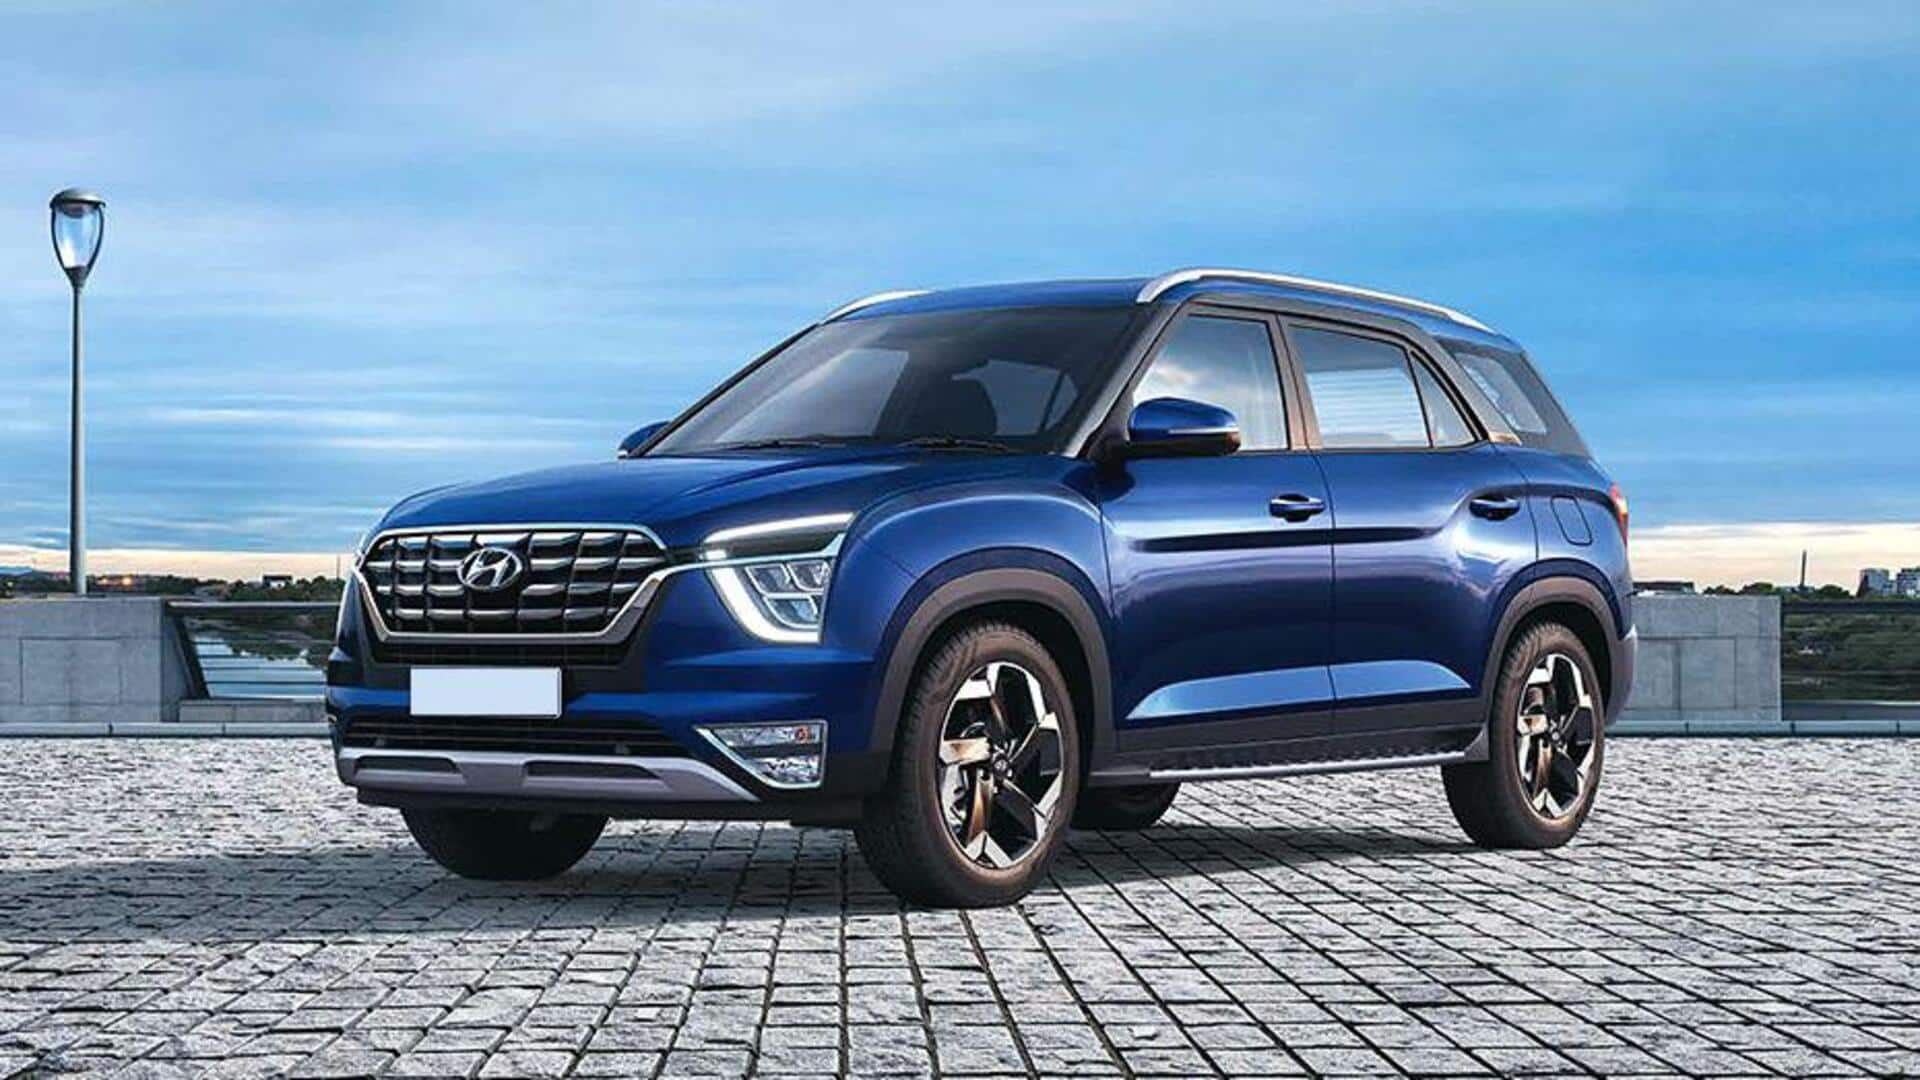 Hyundai ALCAZAR (facelift) to be launched in India by mid-2024